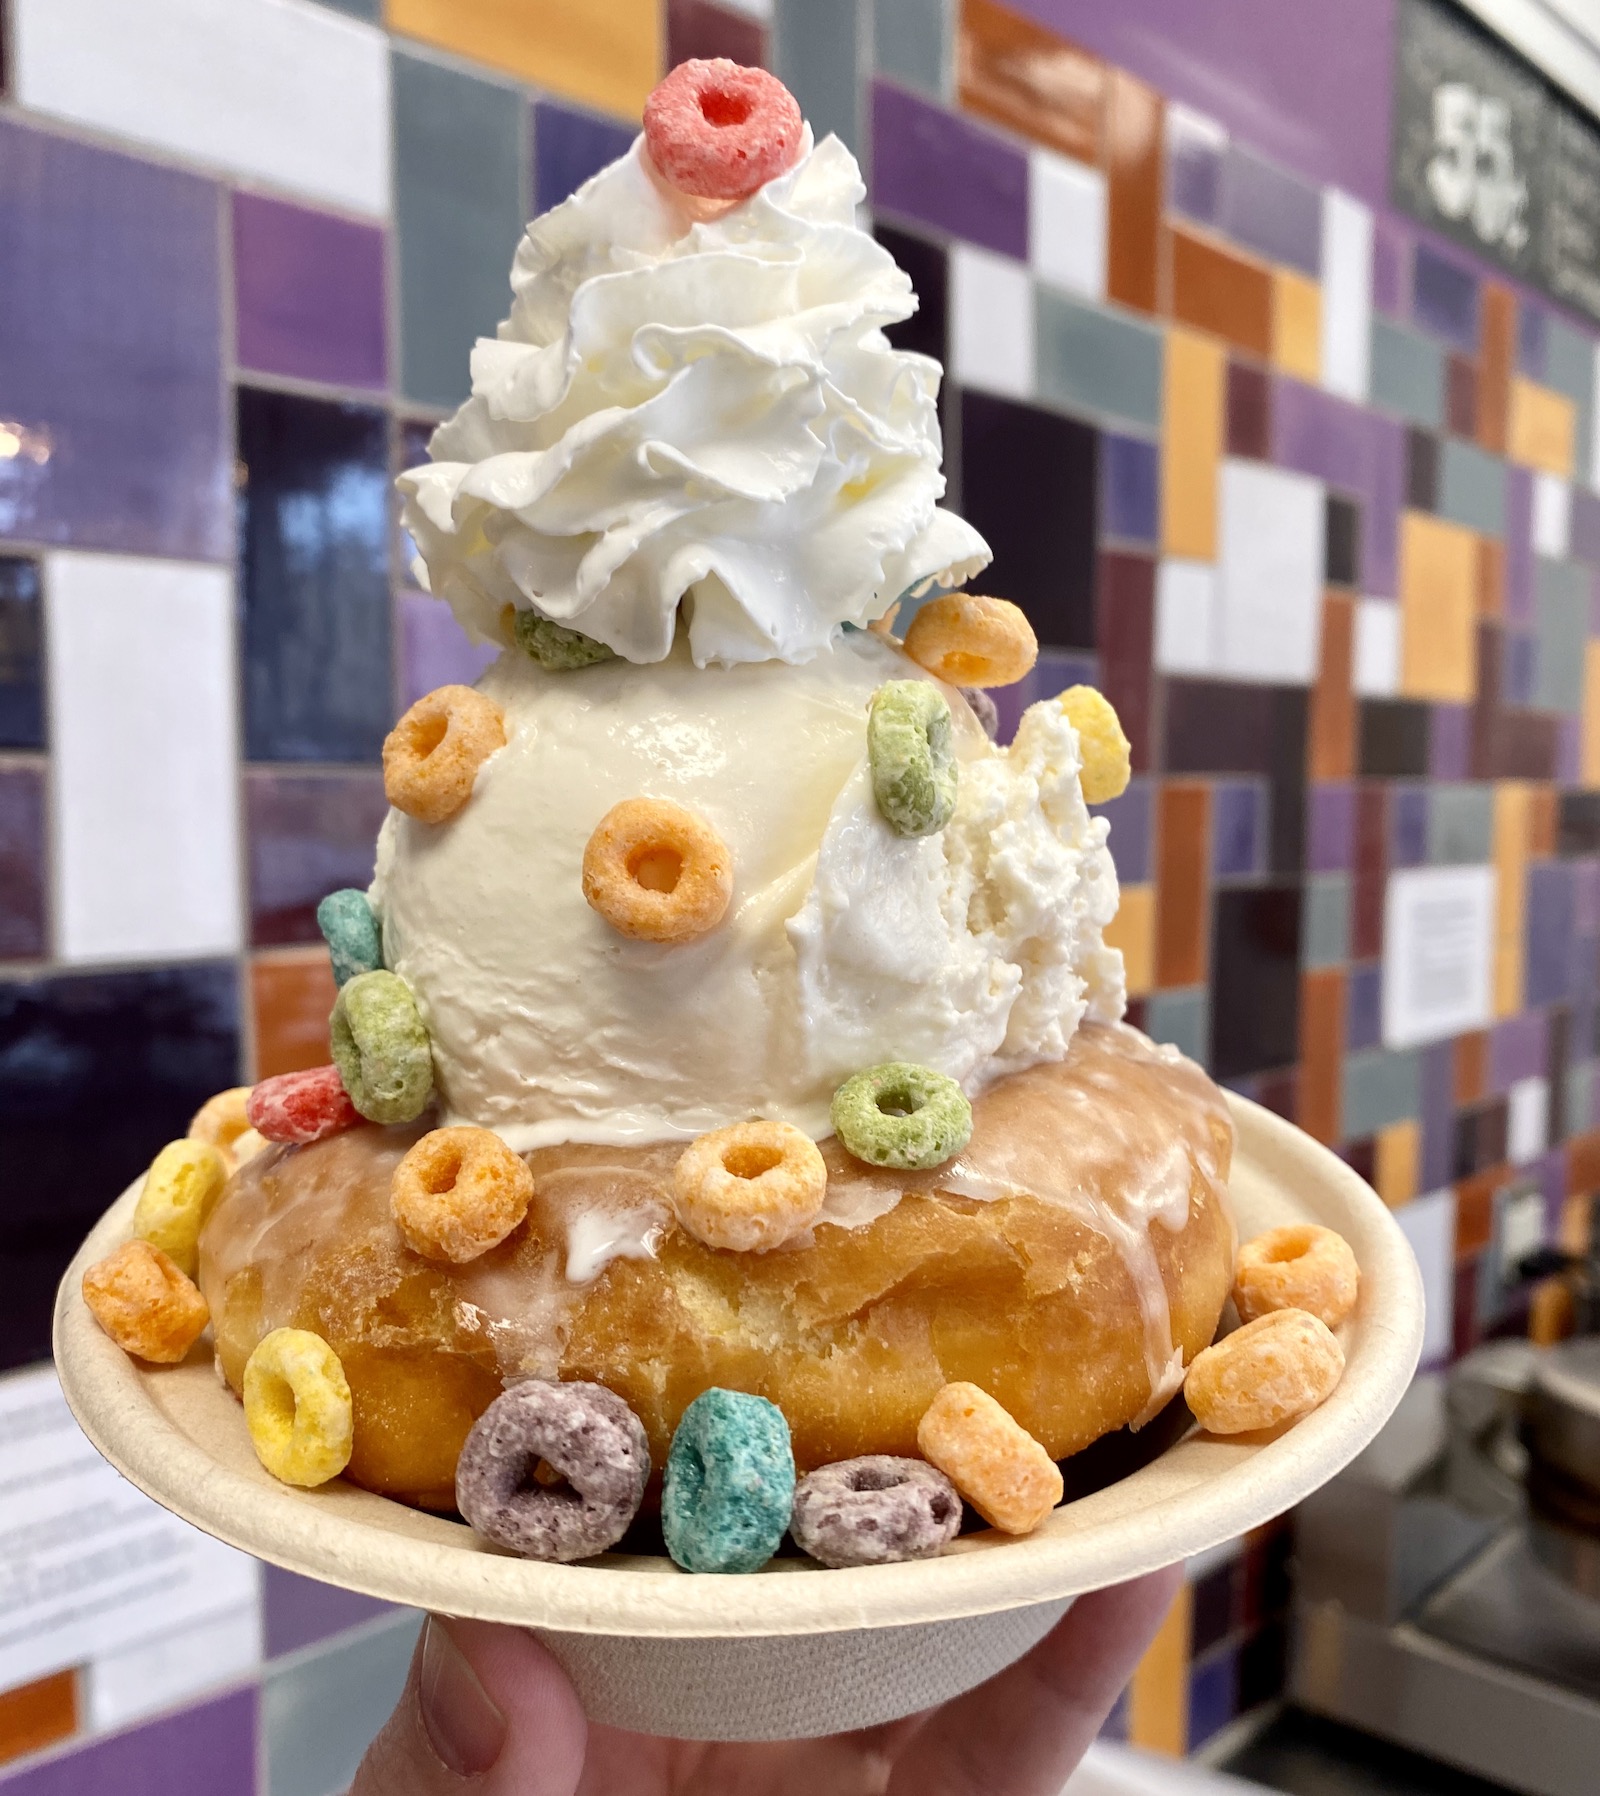 Head to Purple Door on Feb. 1 for an Ice Cream for Breakfast Party